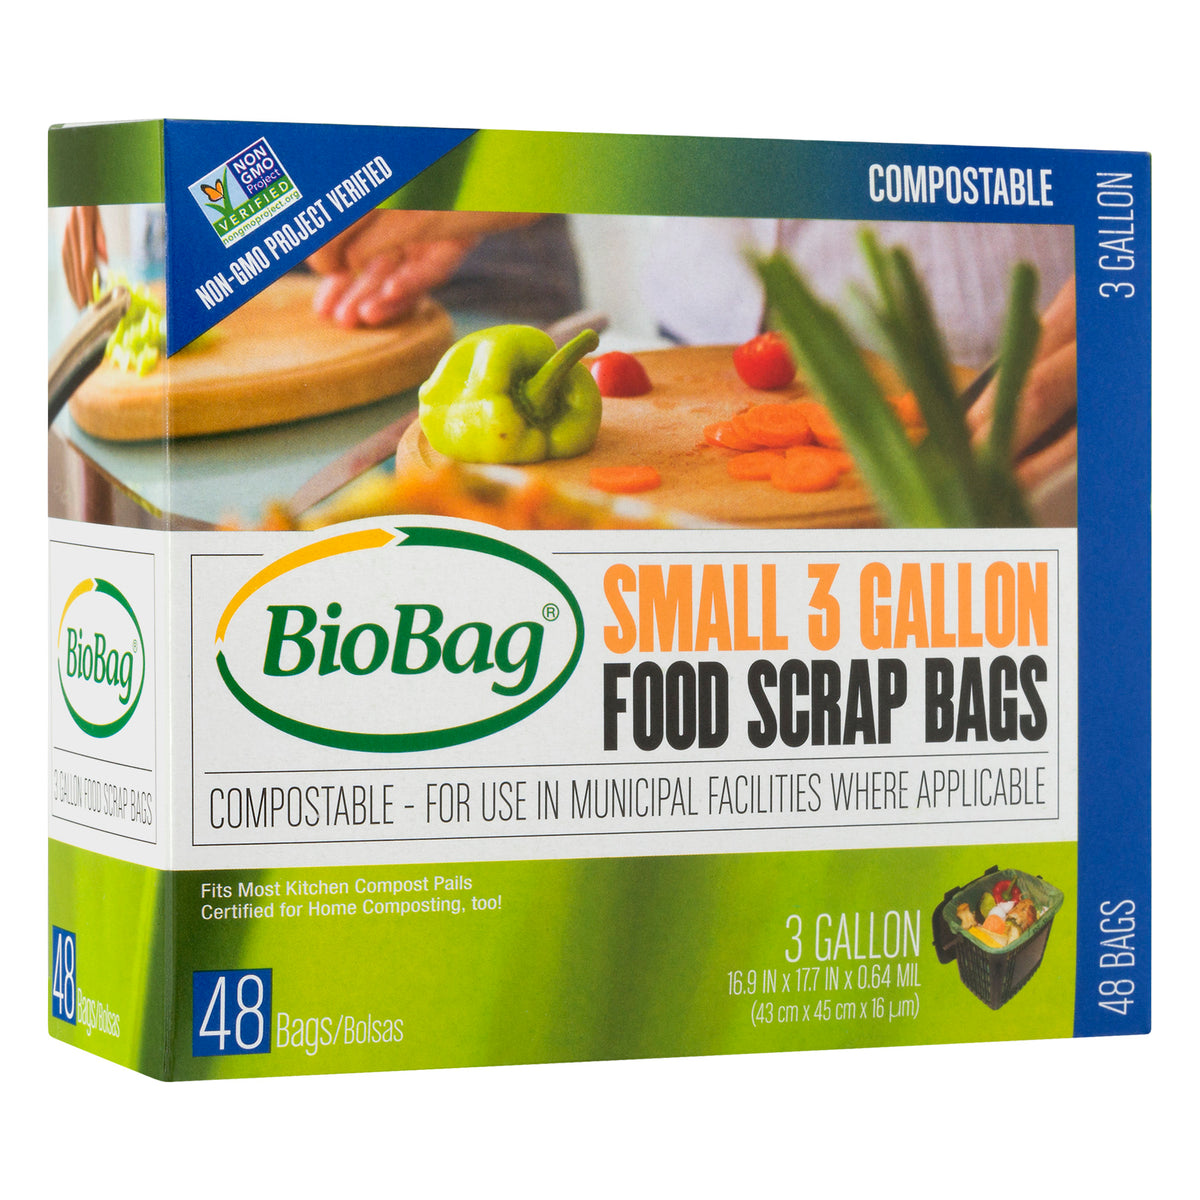 Compostable Food Scrap Bags - Box of 48 - Off the Bottle Refill Shop